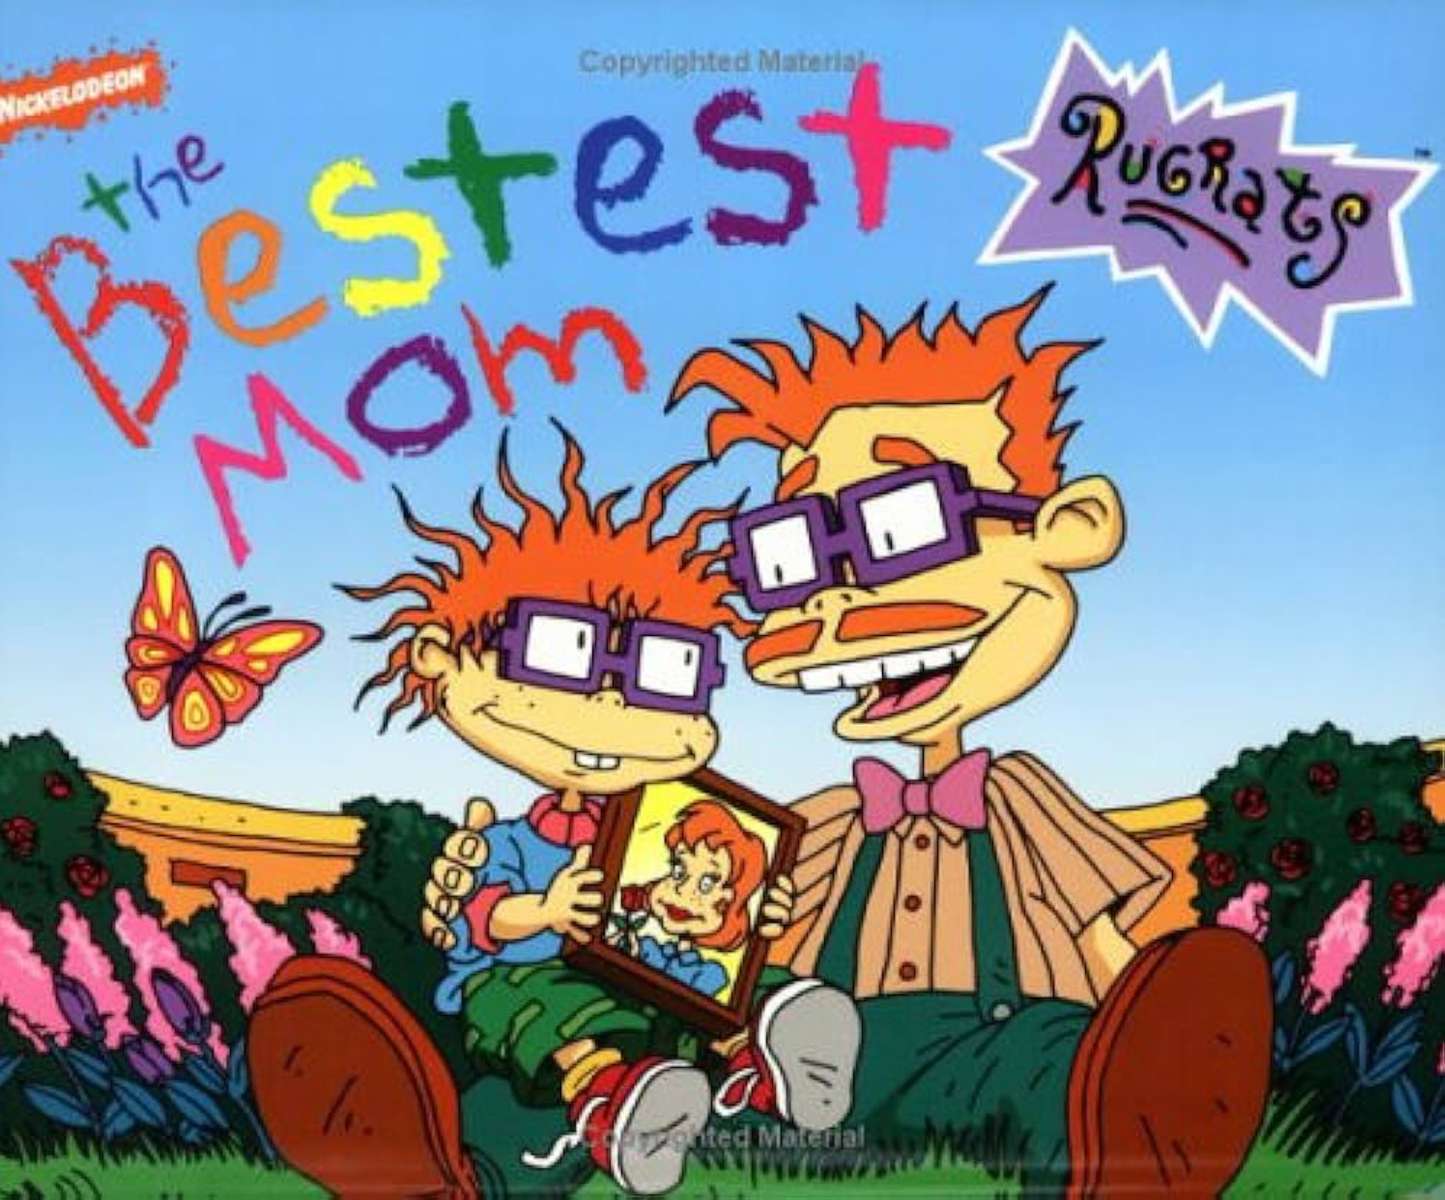 The Bestest Mom (Nickelodeon Rugrats) book cover online puzzle